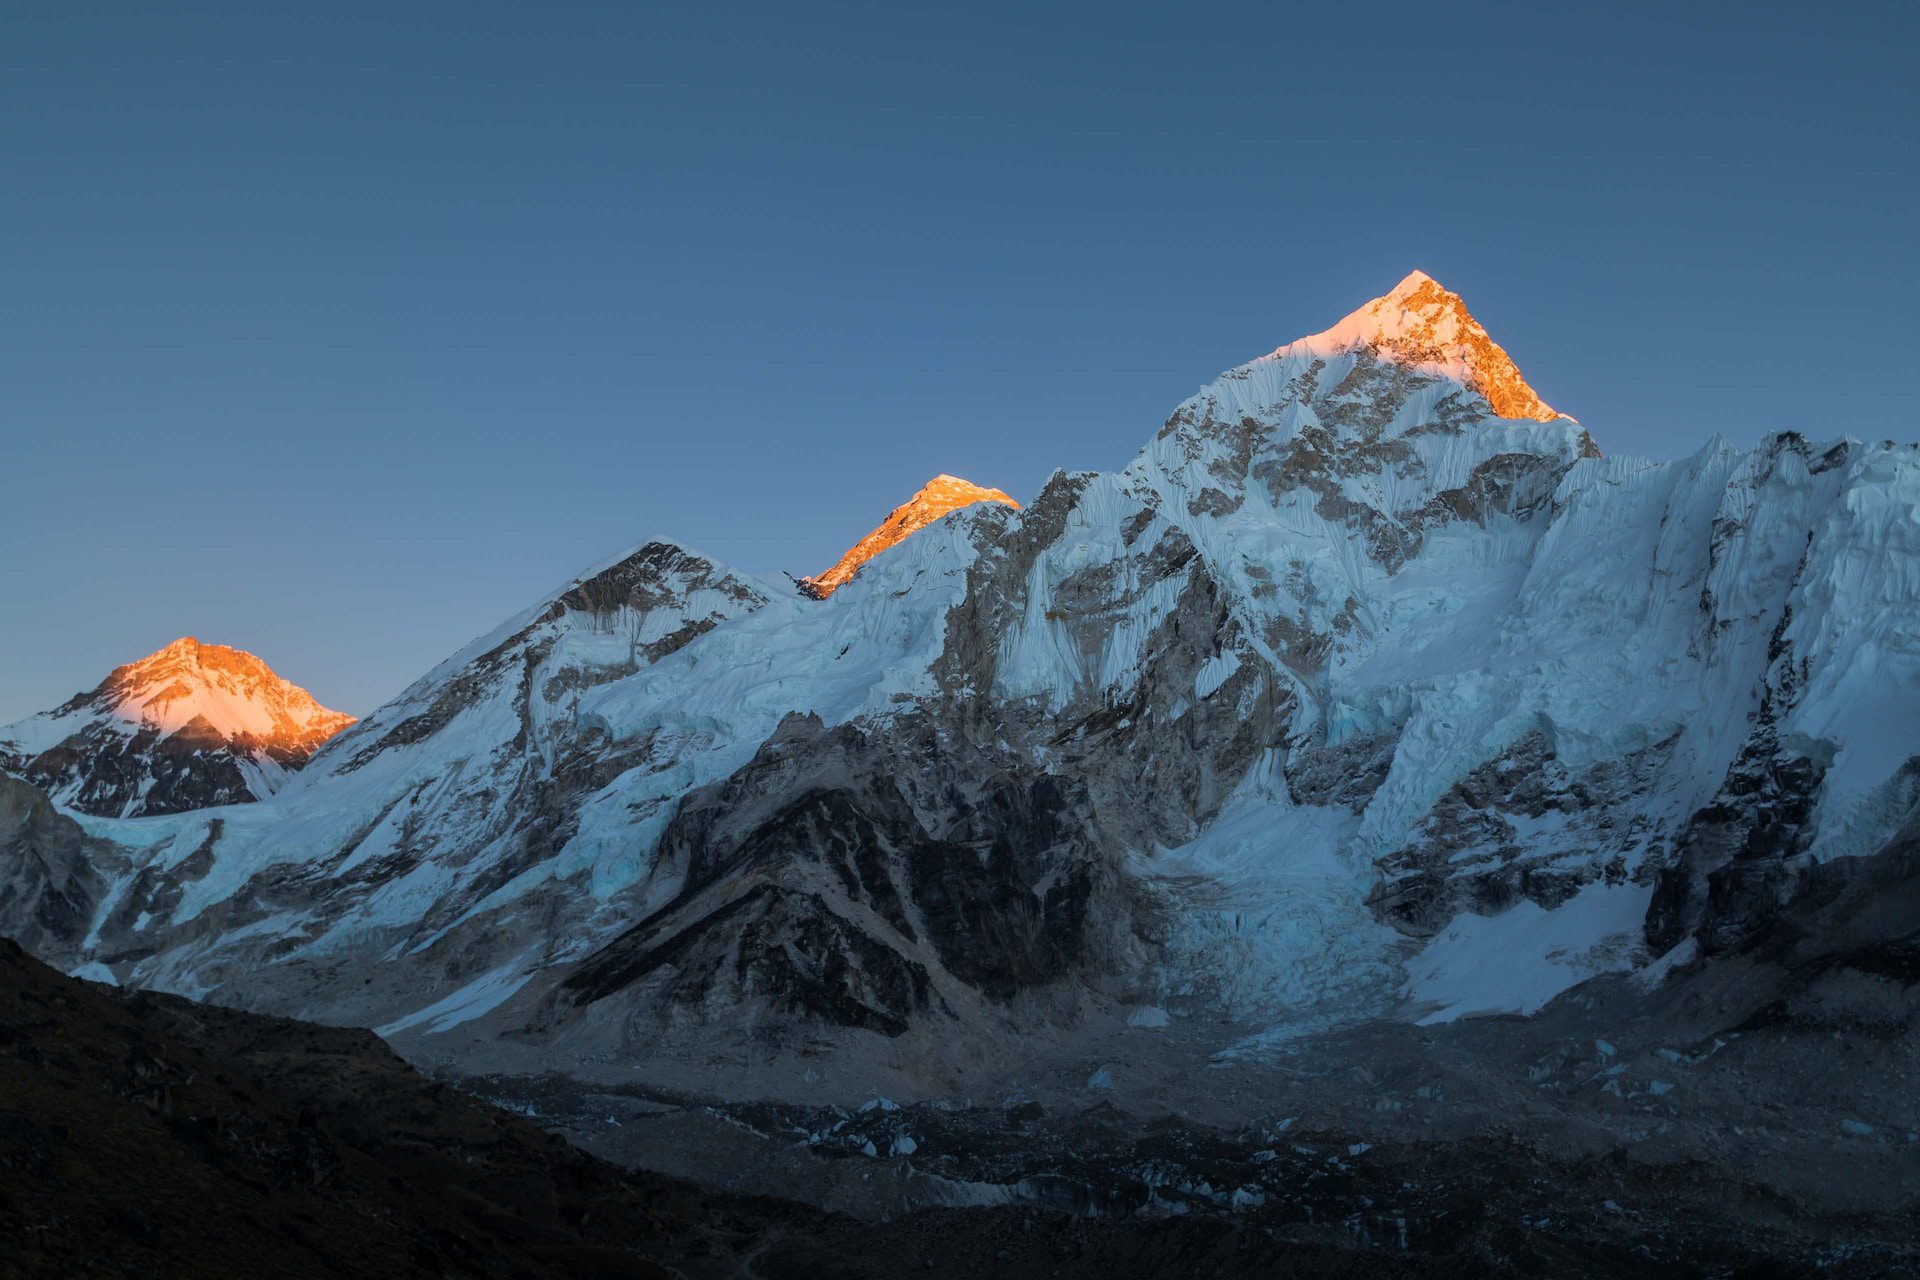 Image of mount everest with three peaks bathed in sunshine